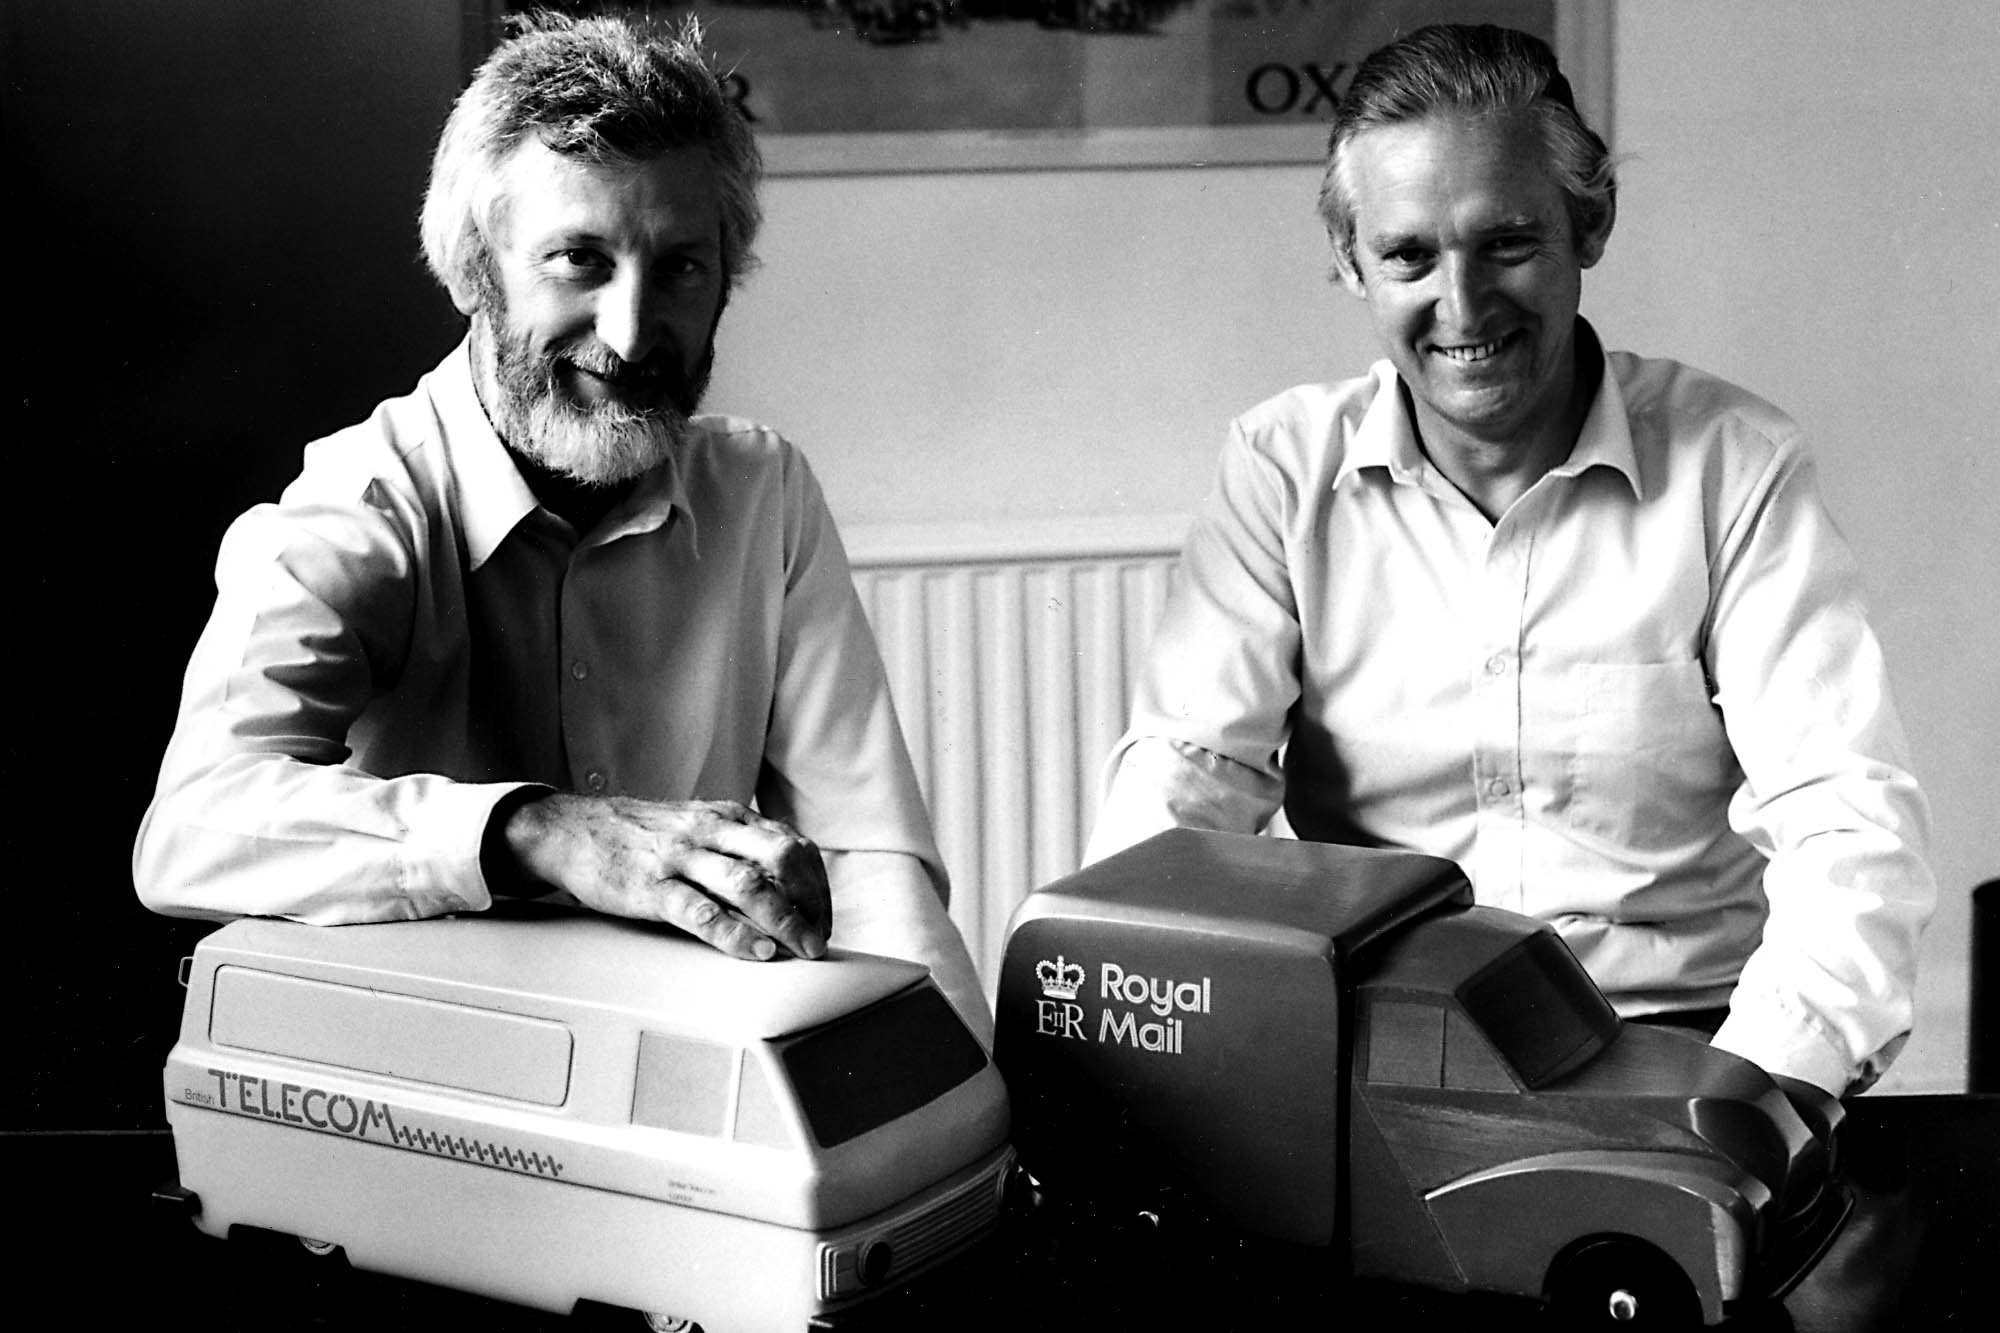  Colin Banks (l) and John Miles (r) with models of British Telecom and Royal Mail vehicles featuring their identities 